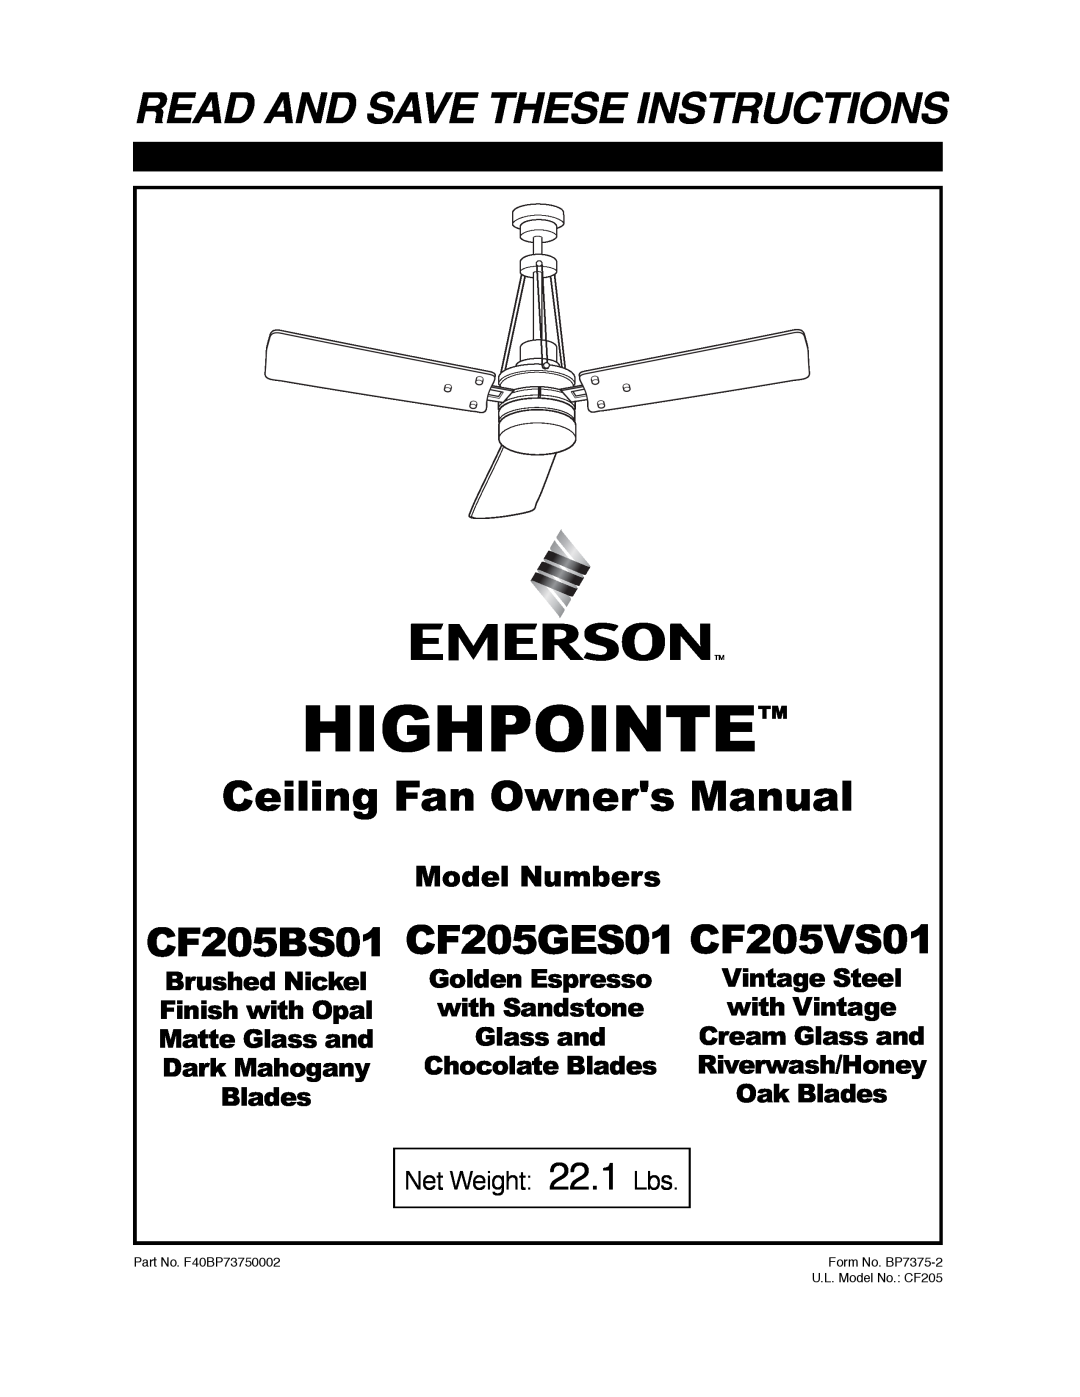 Electrolux CF205GES01 owner manual Net Weight 22.1 Lbs, Highpointe, Read And Save These Instructions, Model Numbers 